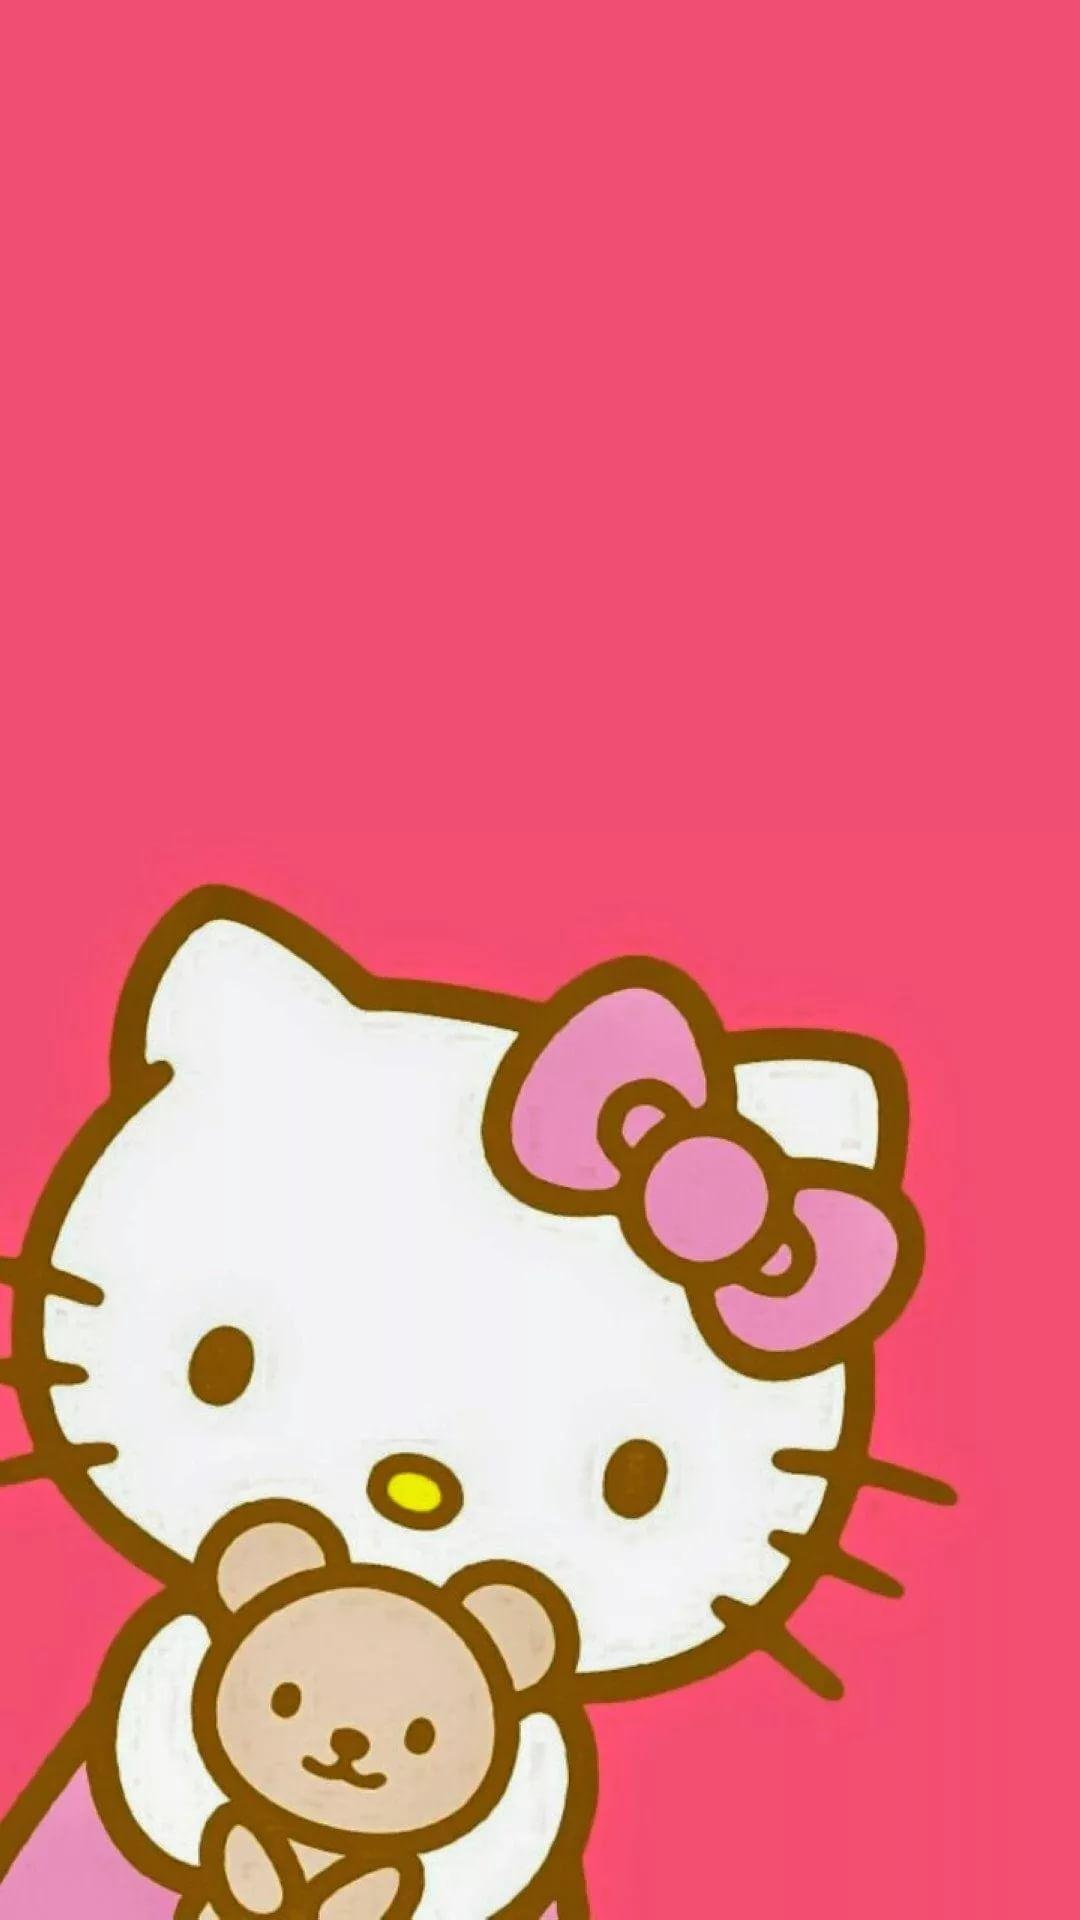 Hello Kitty: The character's first appearance on an item was in March 1975 on a vinyl coin purse. 1080x1920 Full HD Background.